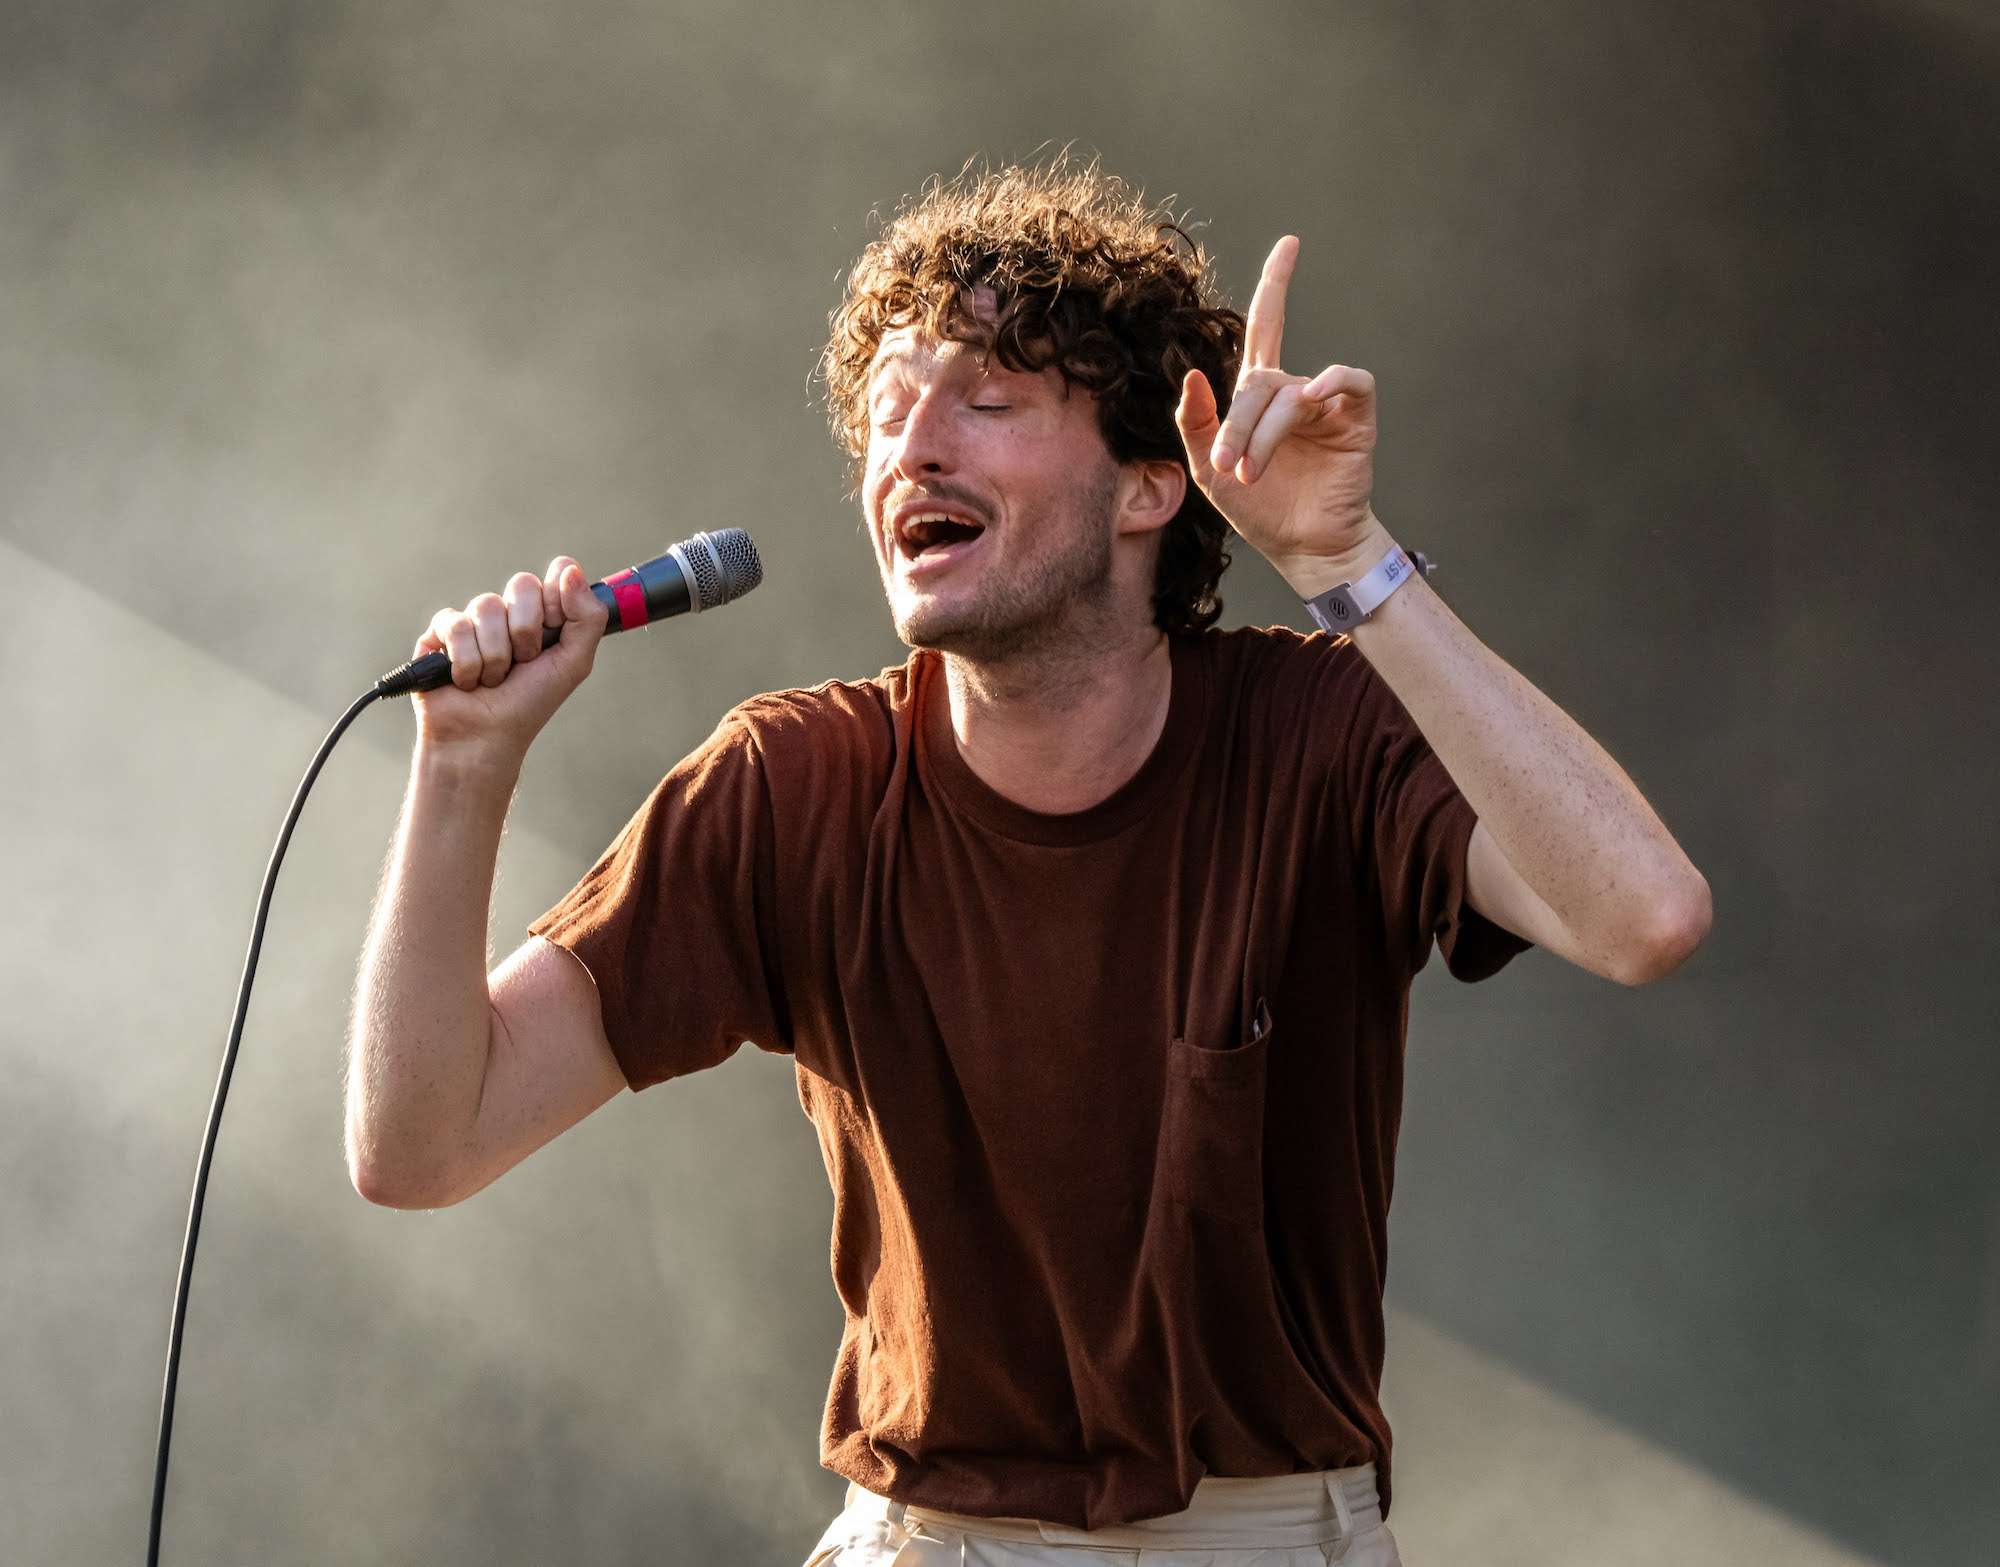 Nation Of Language Live At Pitchfork [GALLERY] 4